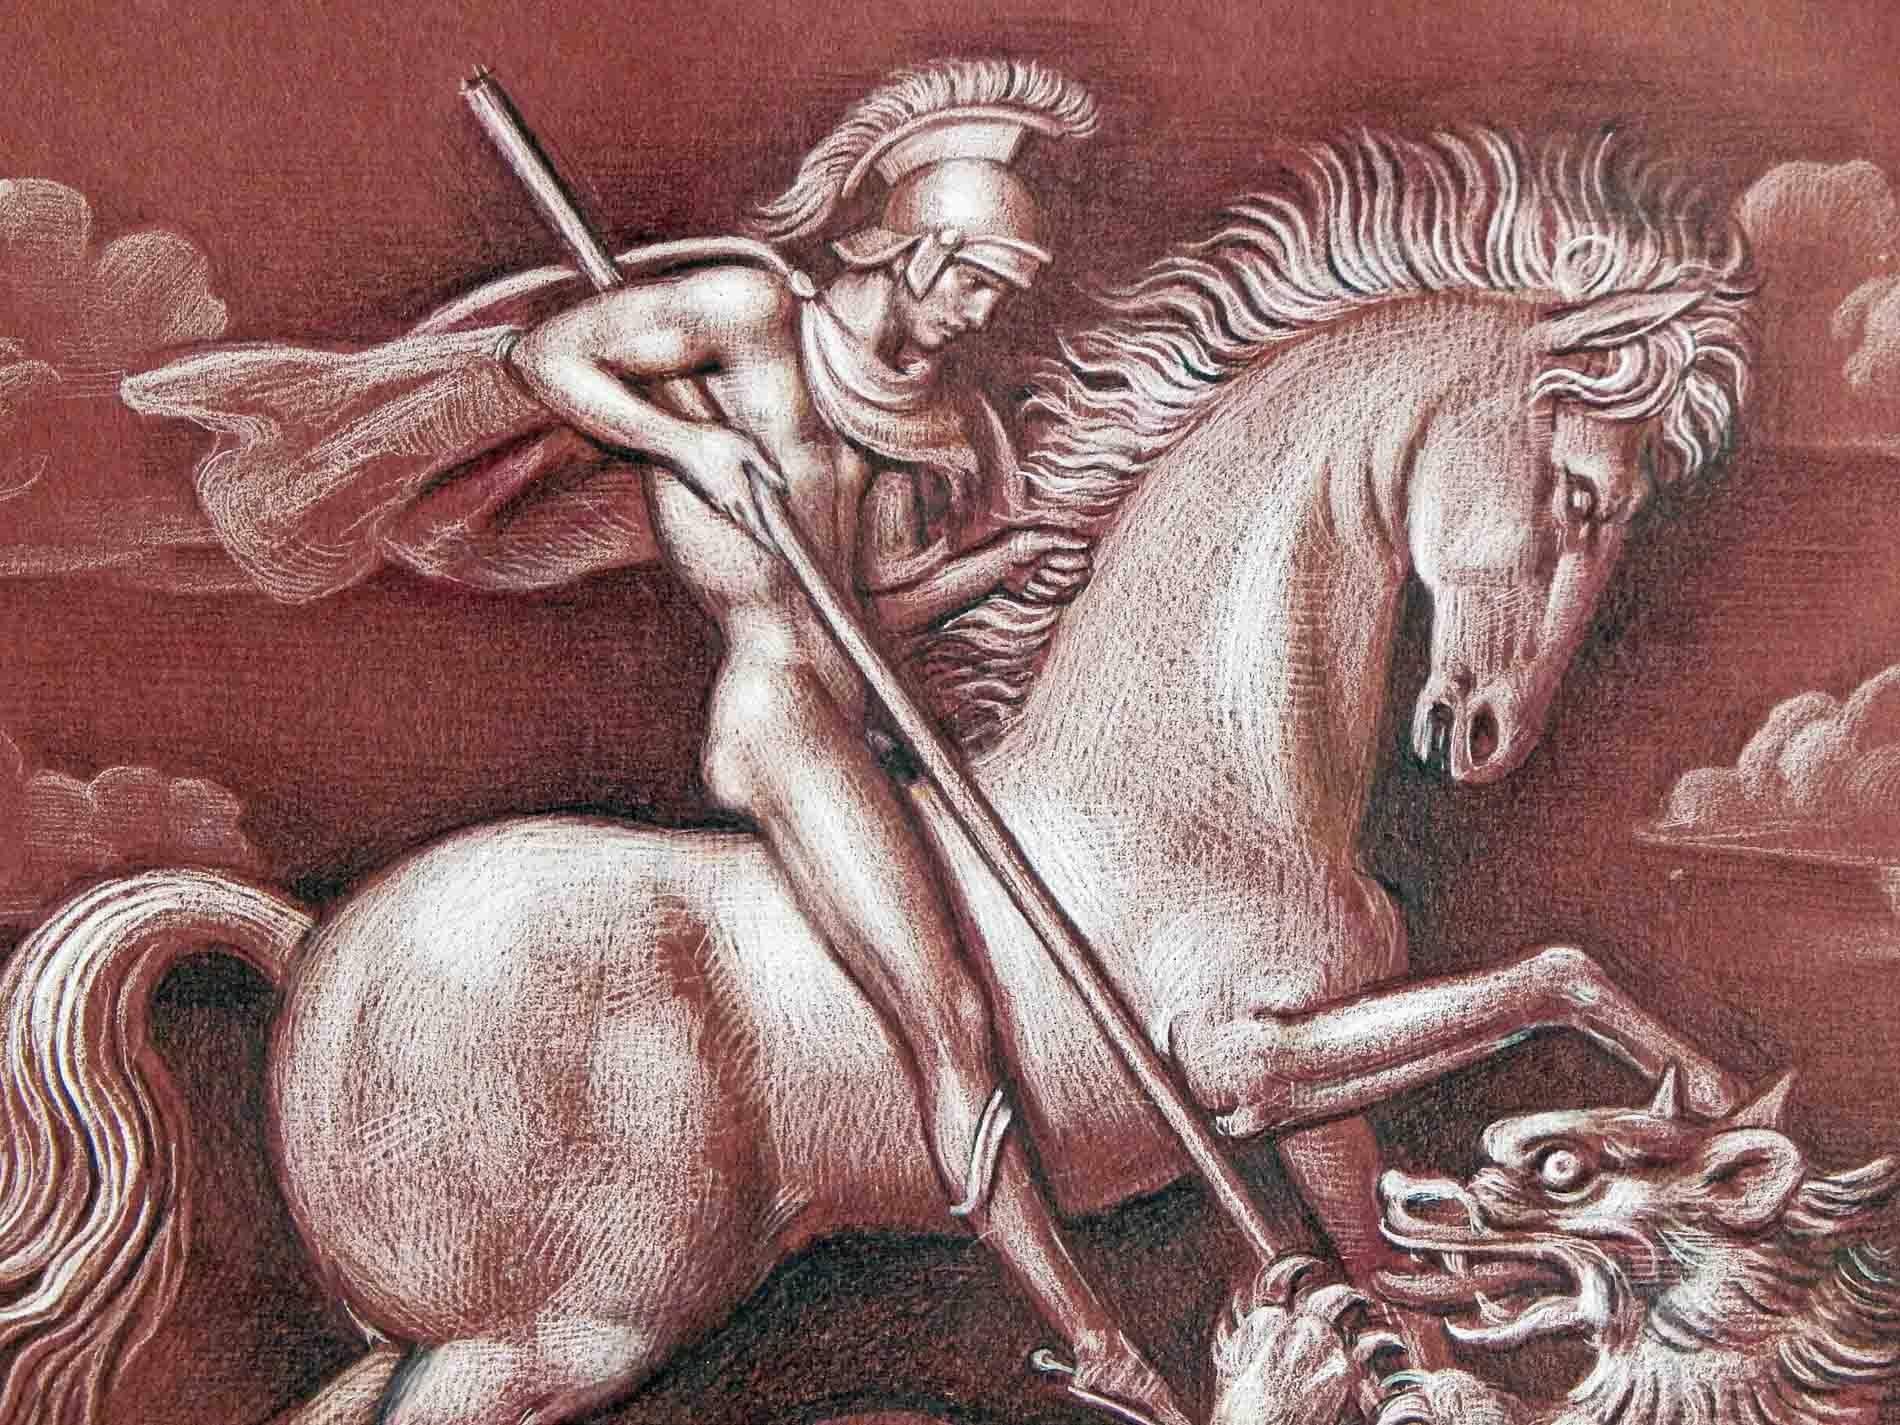 This dramatic drawing of St. George and the dragon was executed in 1954 by Gaston Goor, who was famous for illustrating a number of books by Roger Peyrefitte and others in France. Goor was deeply influenced by the paintings he found at the Louvre in